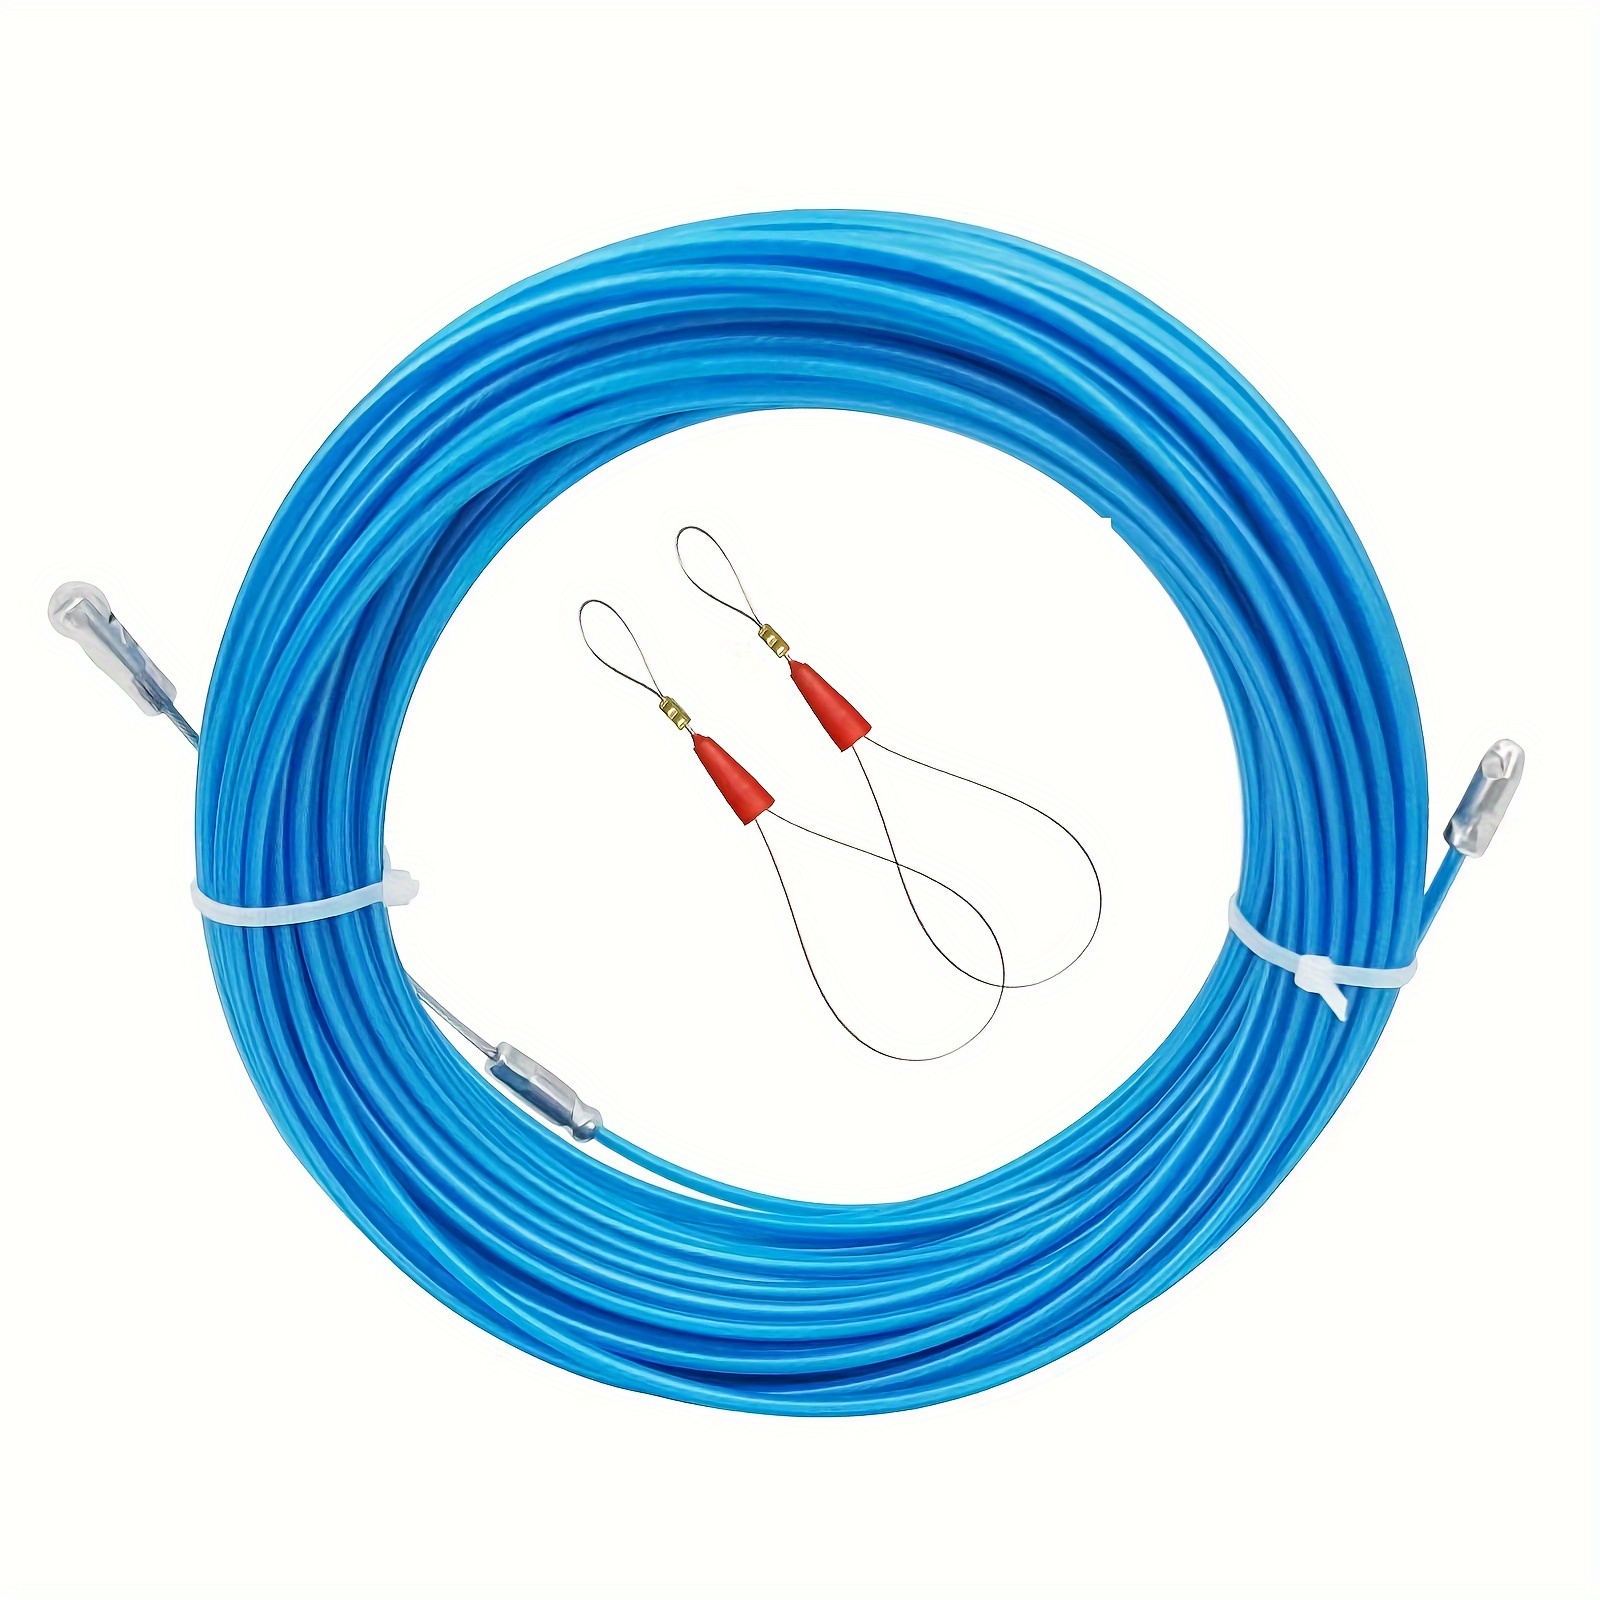 20m Wire Puller Electrical Fish Tape Wire Puller Threader Fastener Cable Puller Fish Tape Kits Blue